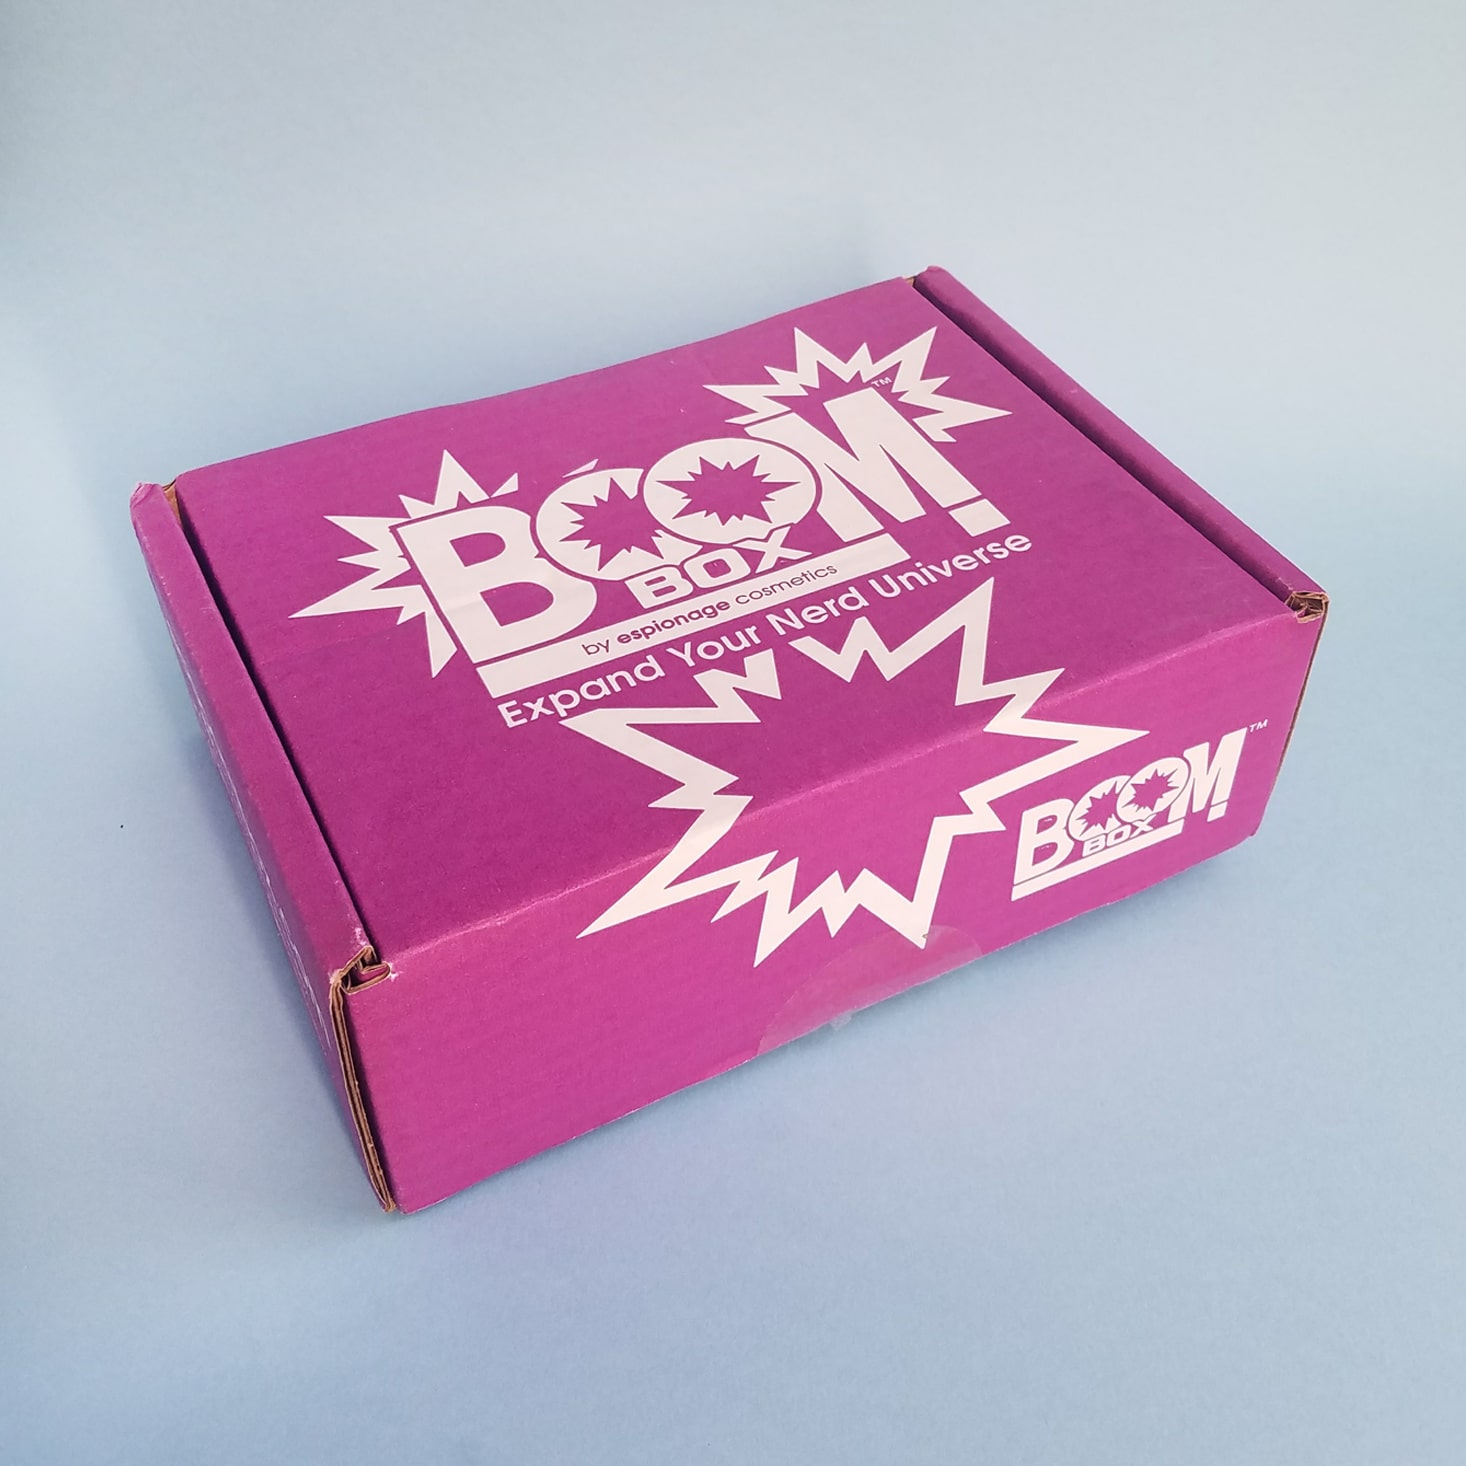 BOOM!Box by Espionage Cosmetics Box Review + Coupon – Summer 2017